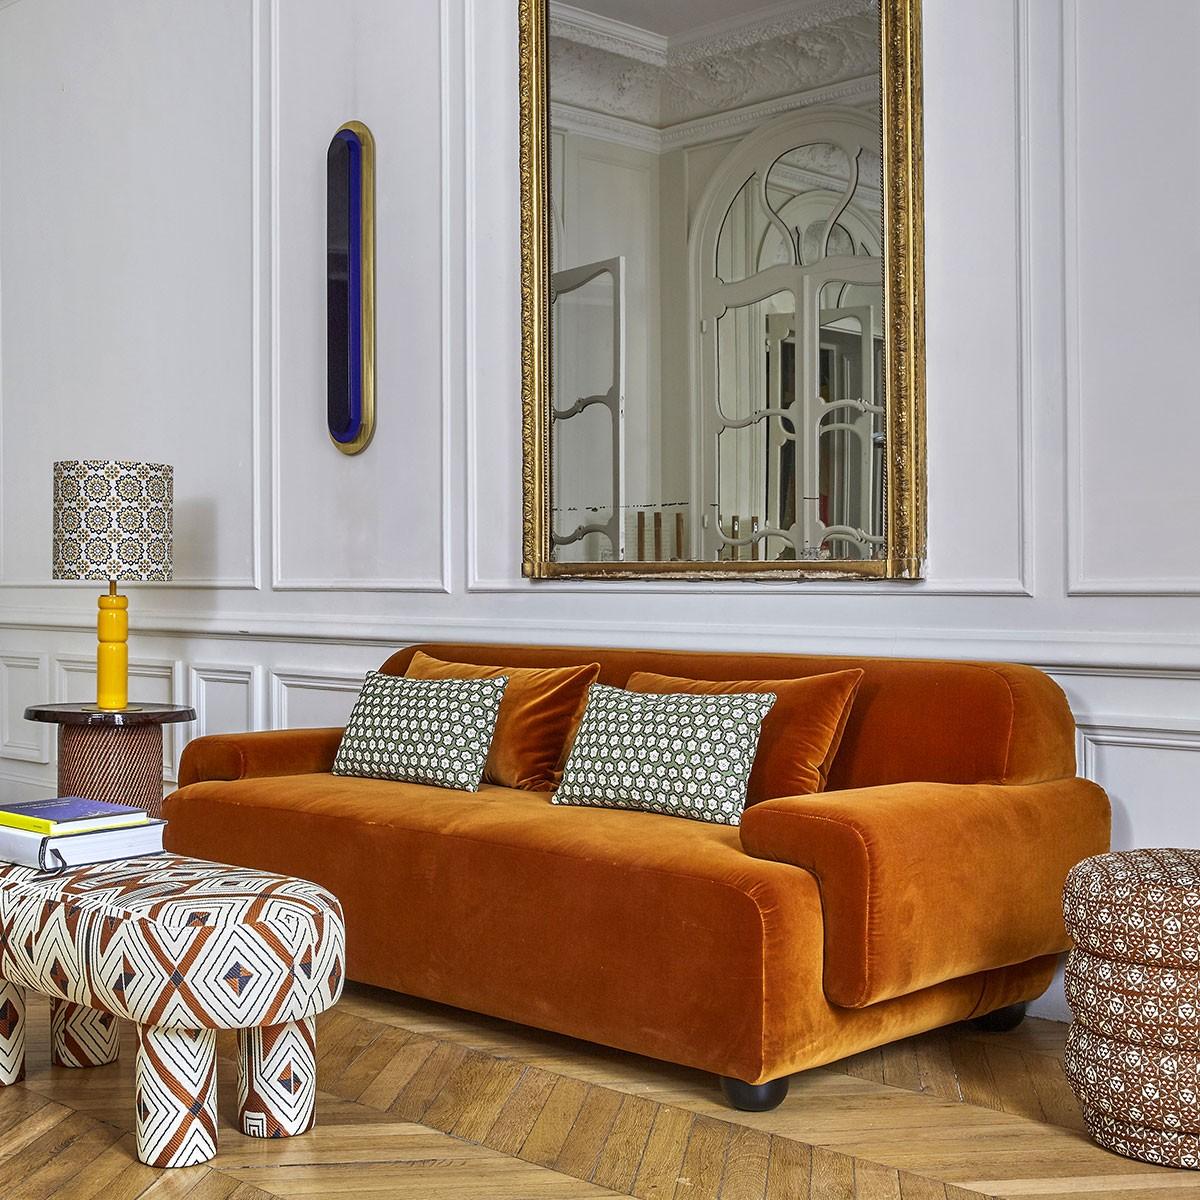 Popus Editions Lena 2.5 Seater Sofa in Corn Megeve Fabric with a Knit Effect

It looks like it's straight out of a movie, with its generous curves and wide armrests. It is a real invitation to spend long Sundays with the family, comfortably seated